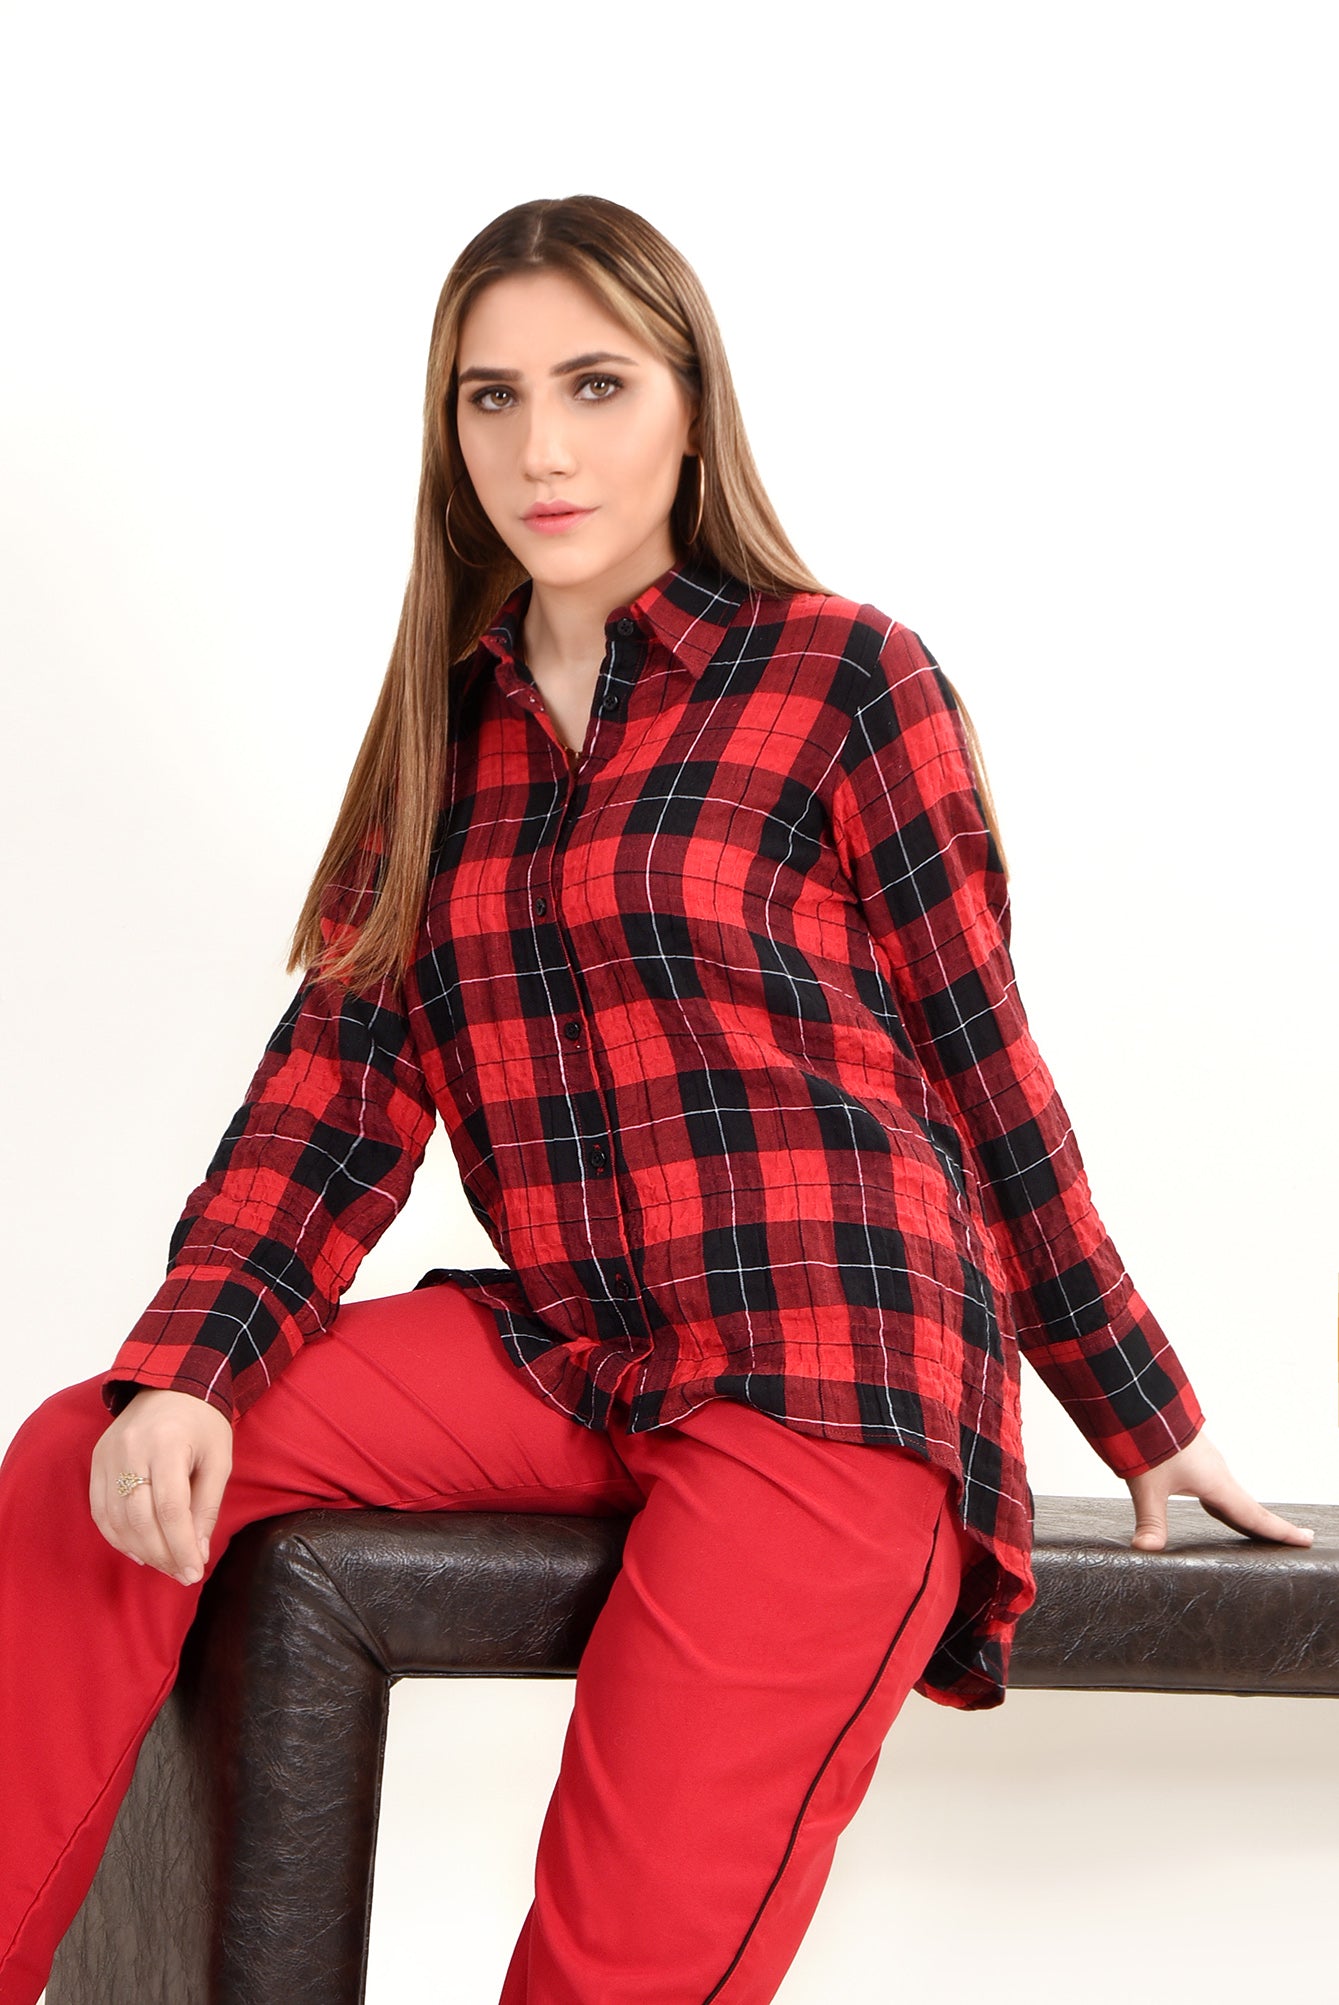 LDS-6490 WESTERN SHIRT CASUAL RED CHECK